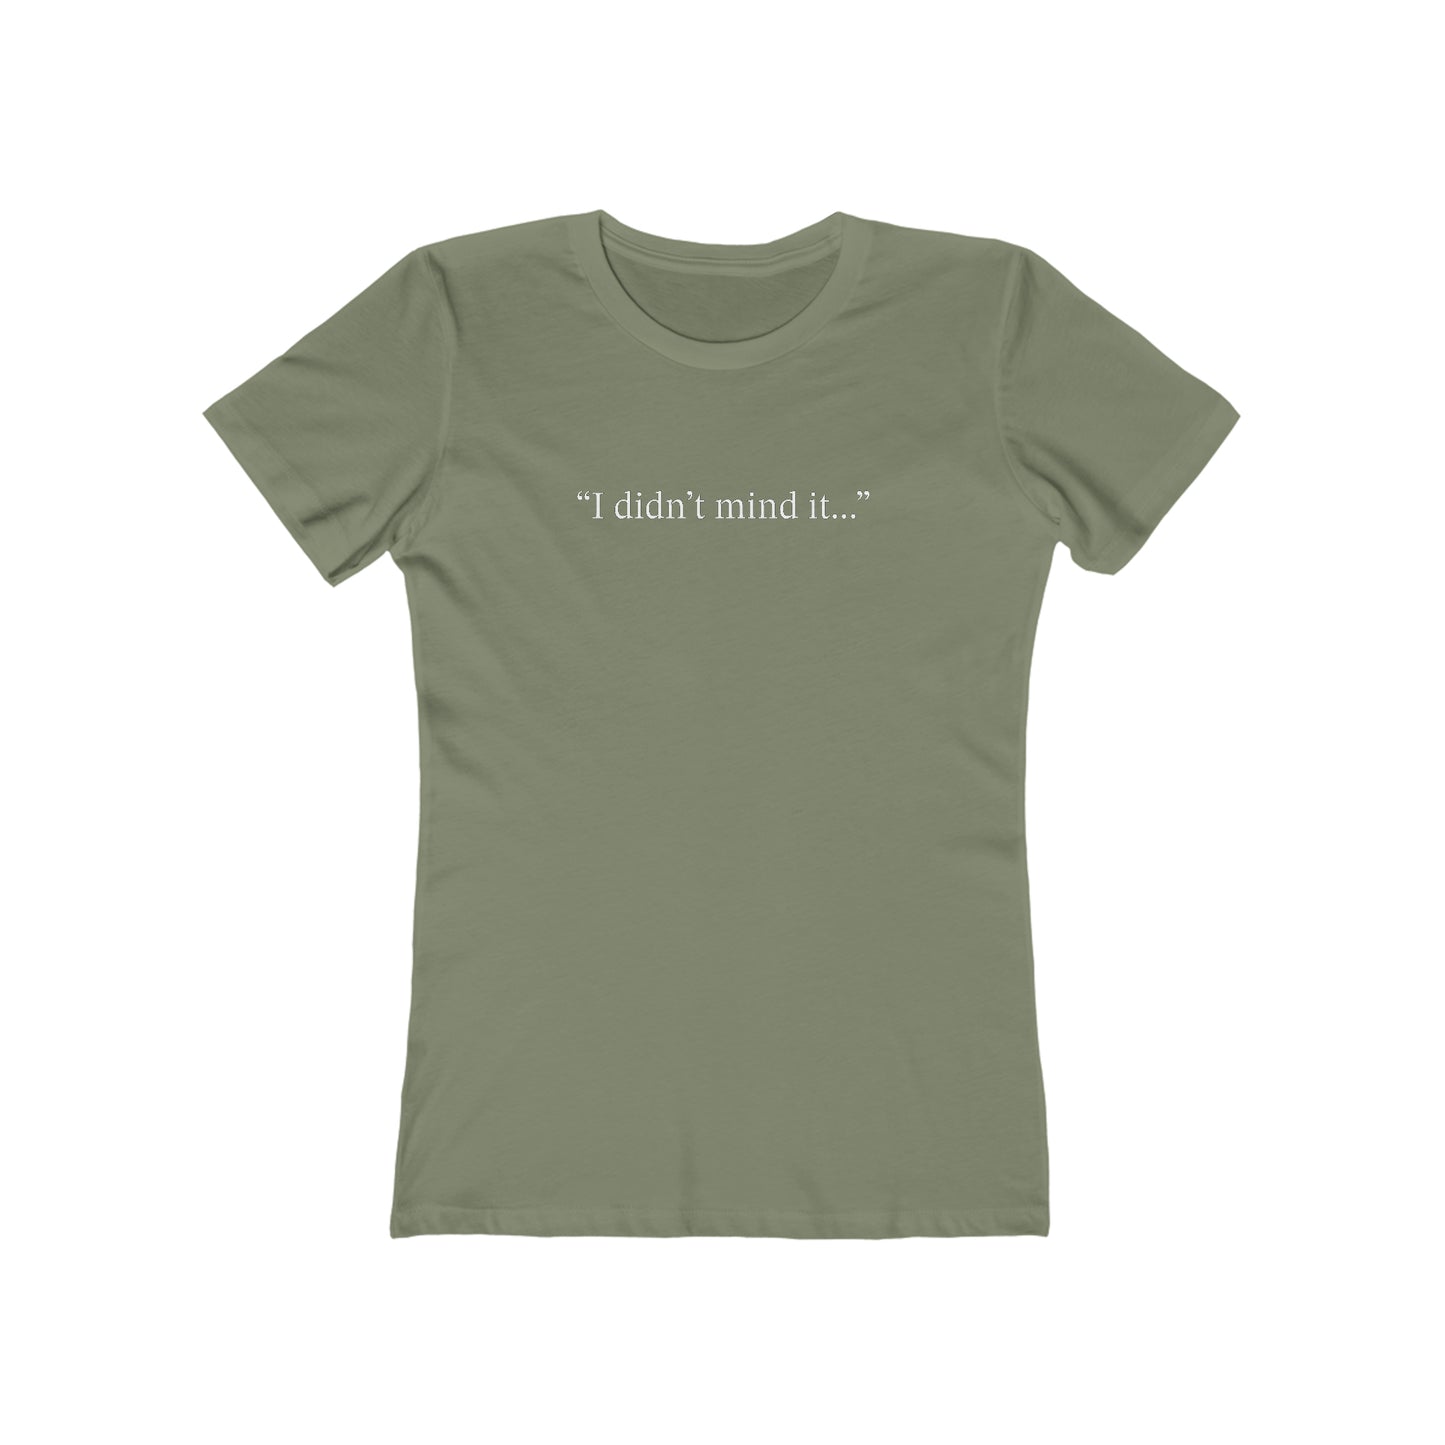 Witch's Movie Coven Heather's Quotable Women's Tee